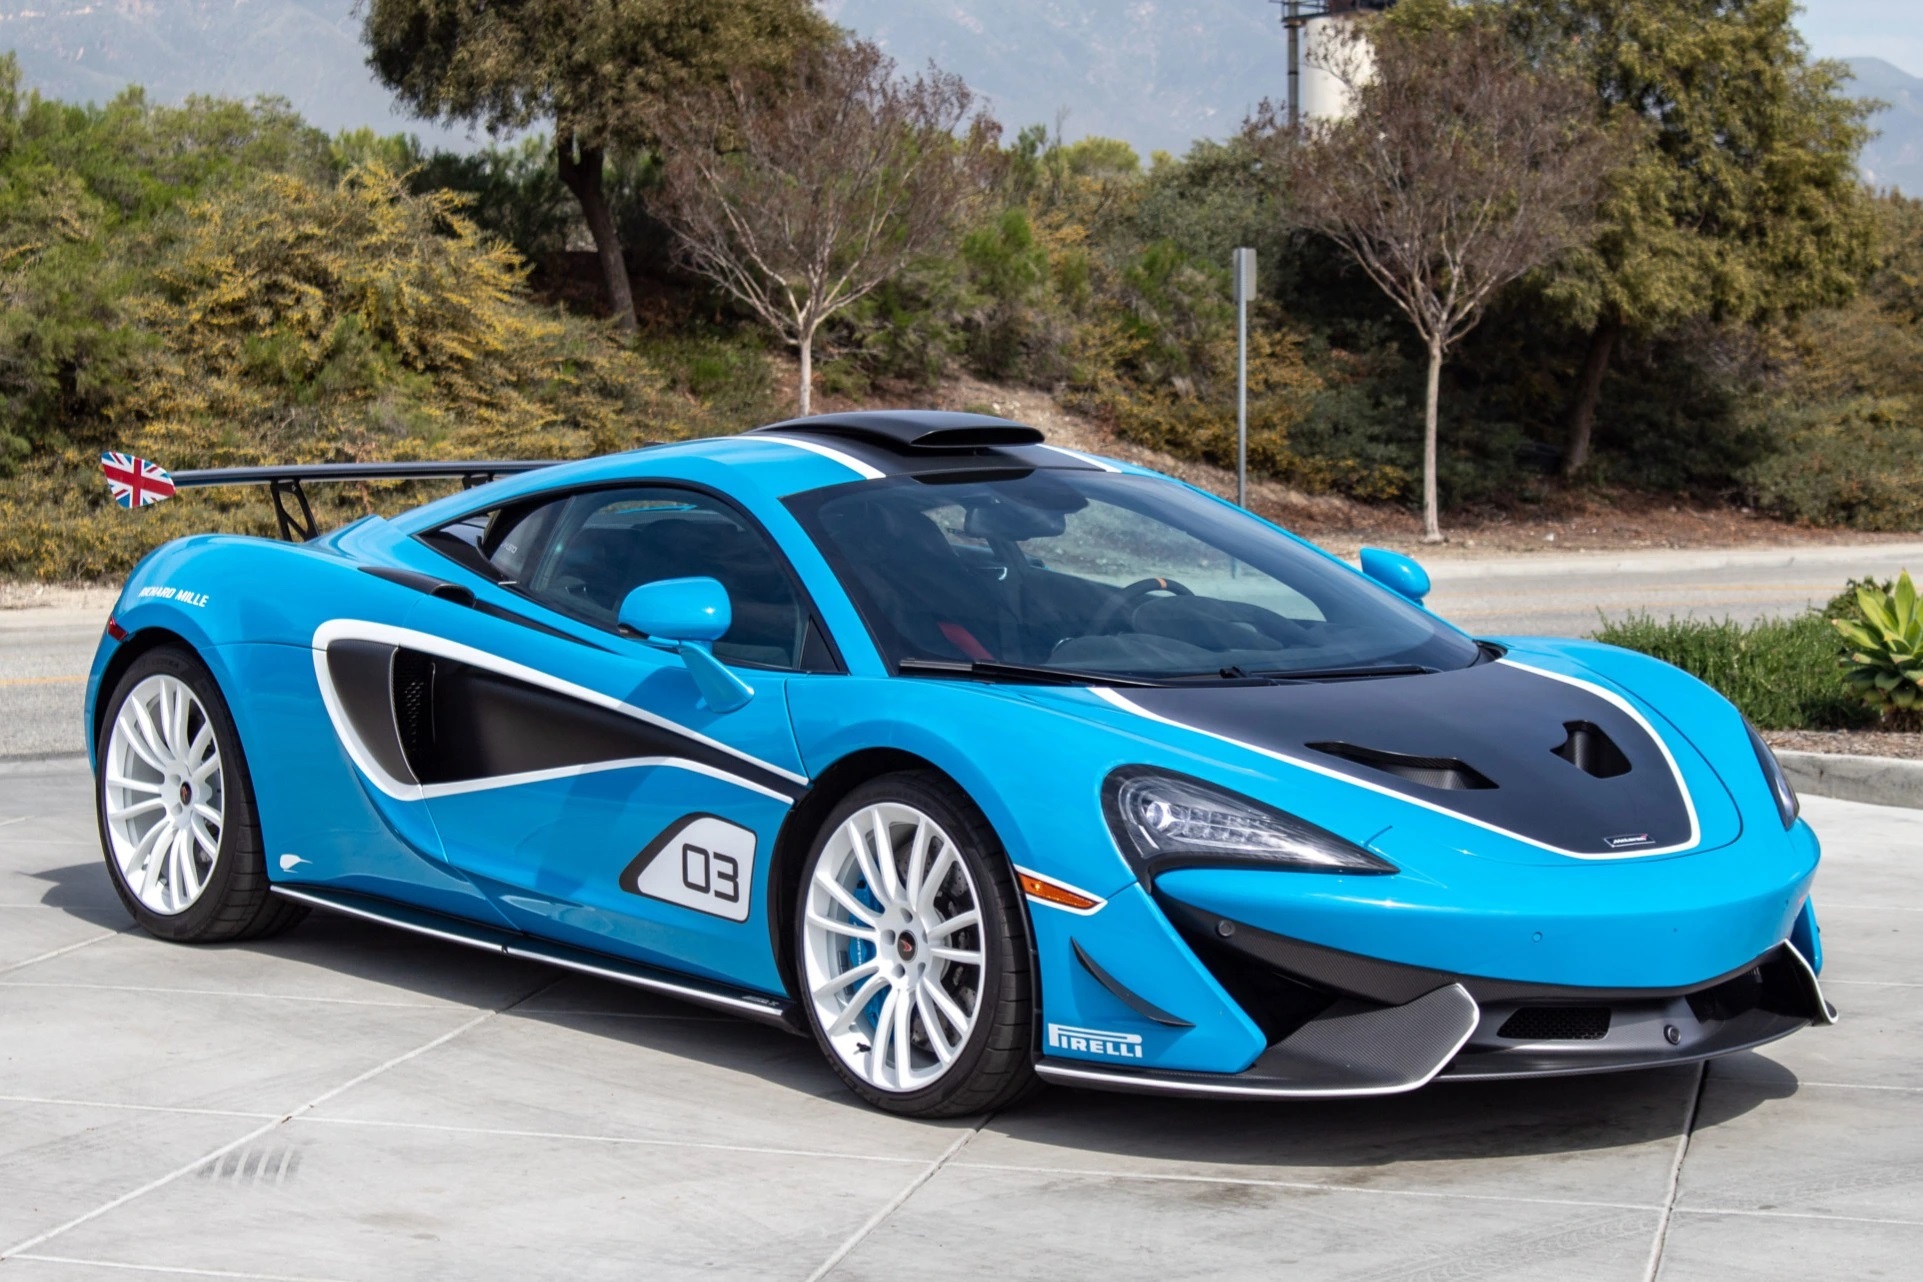 Msoxxx - Car Of The Day: 2018 McLaren 570S MSO X